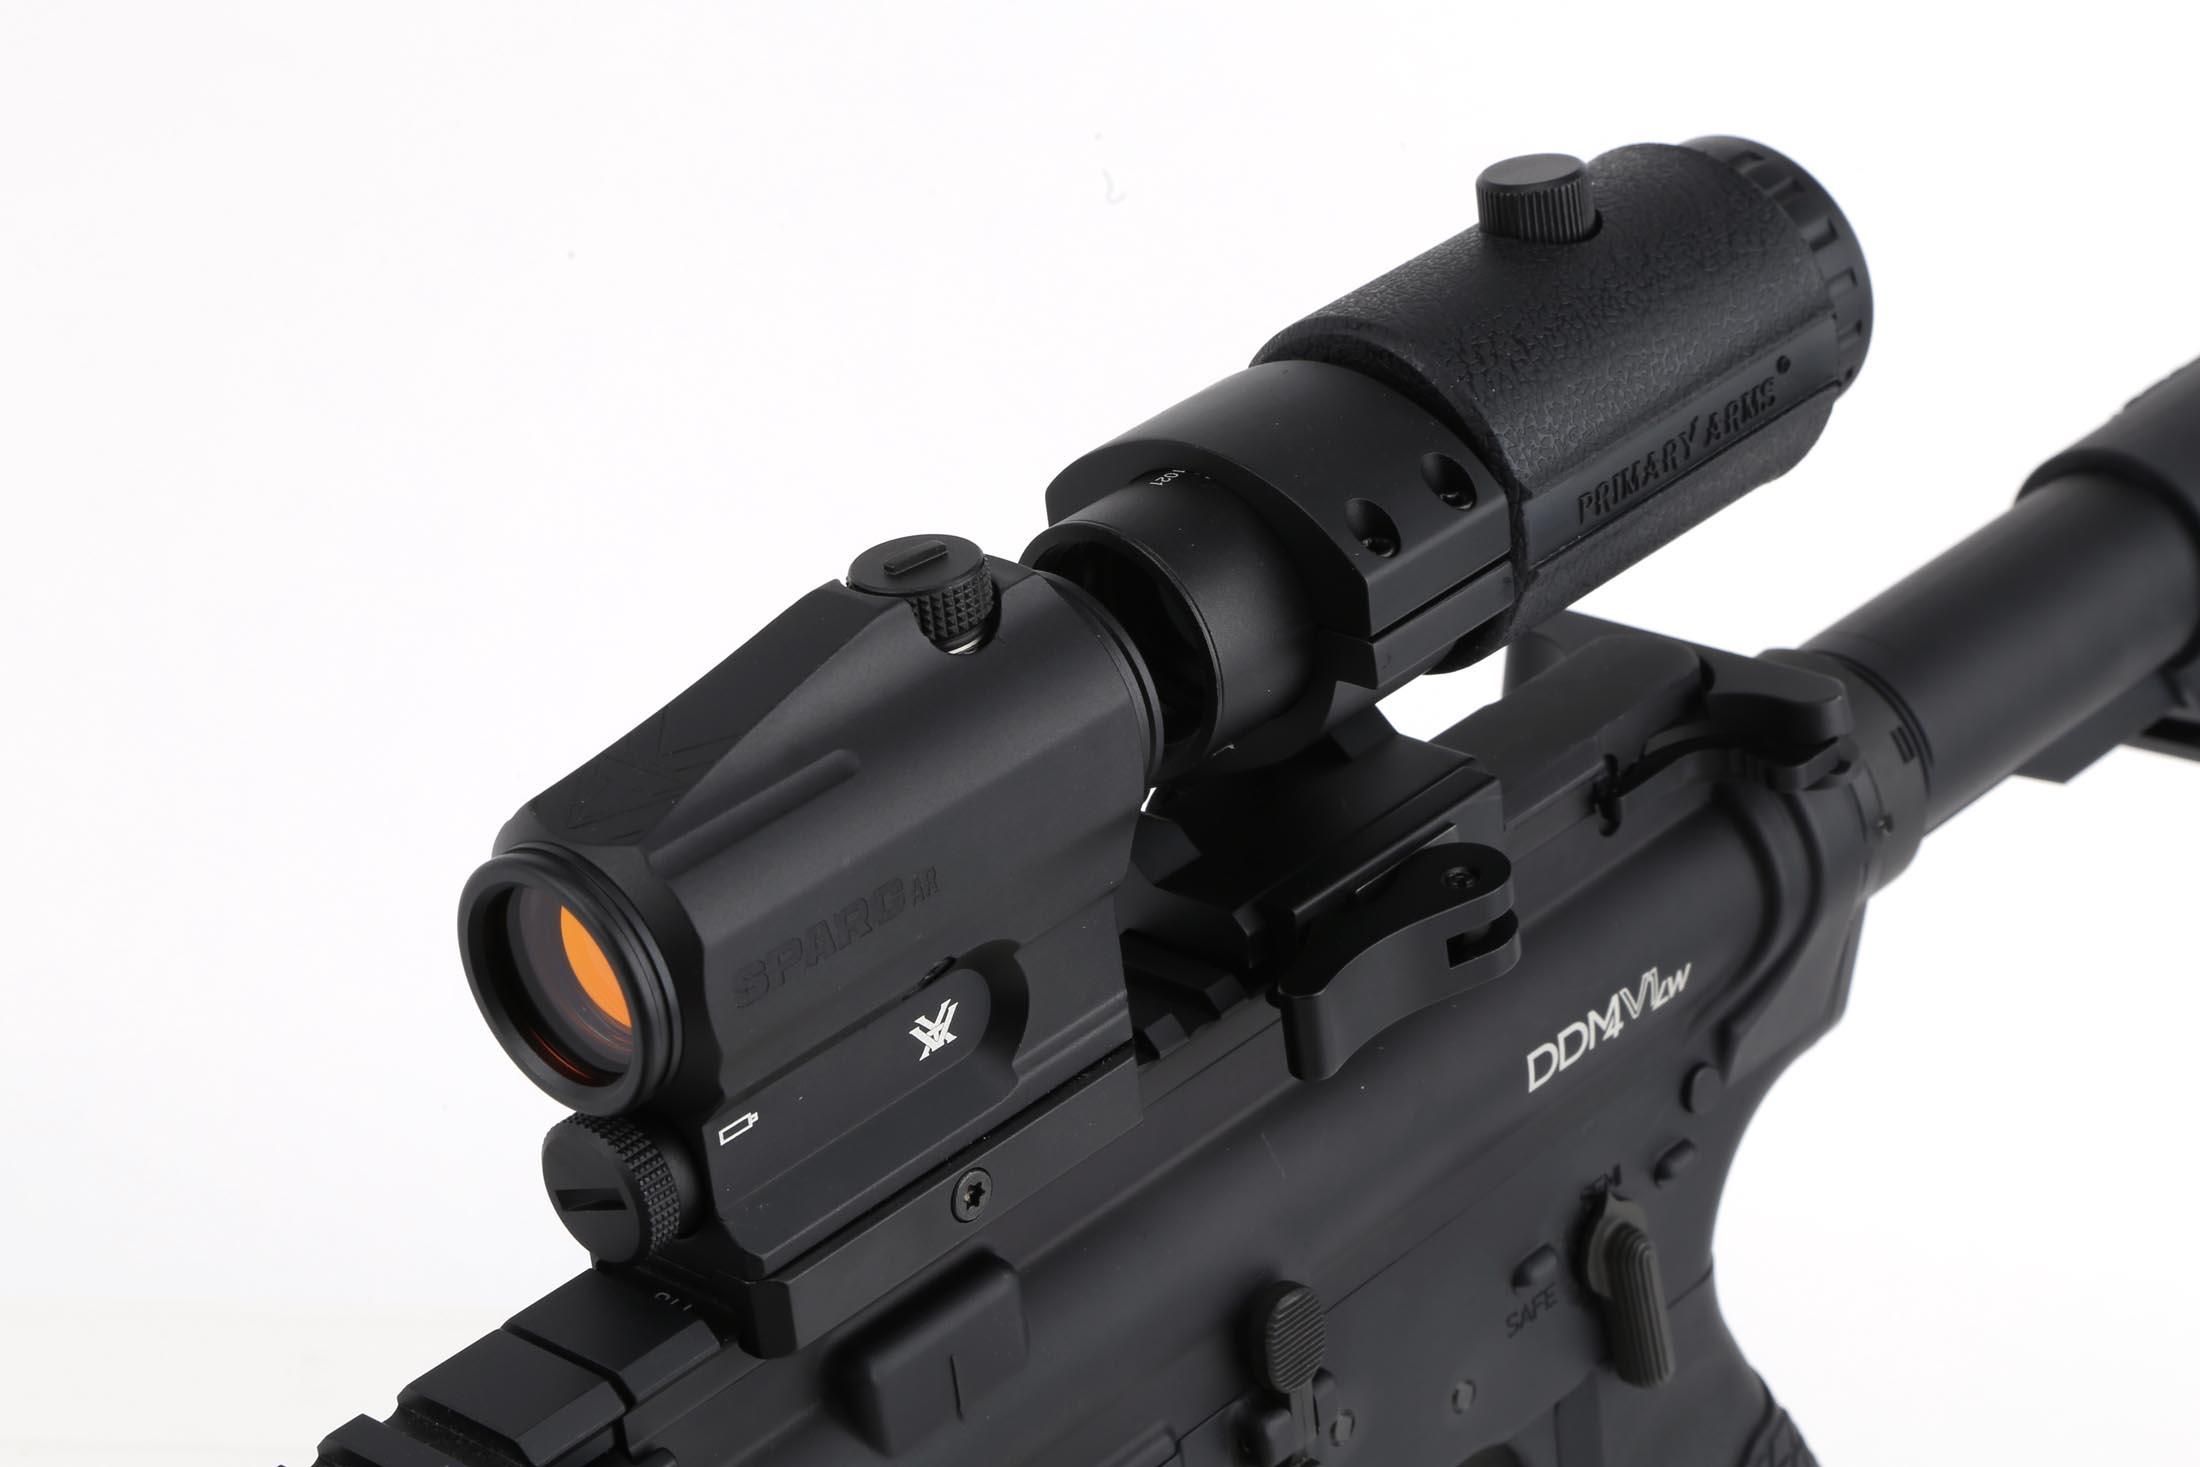 Primary Arms 3X LER Red Dot Magnifier - Gen IV